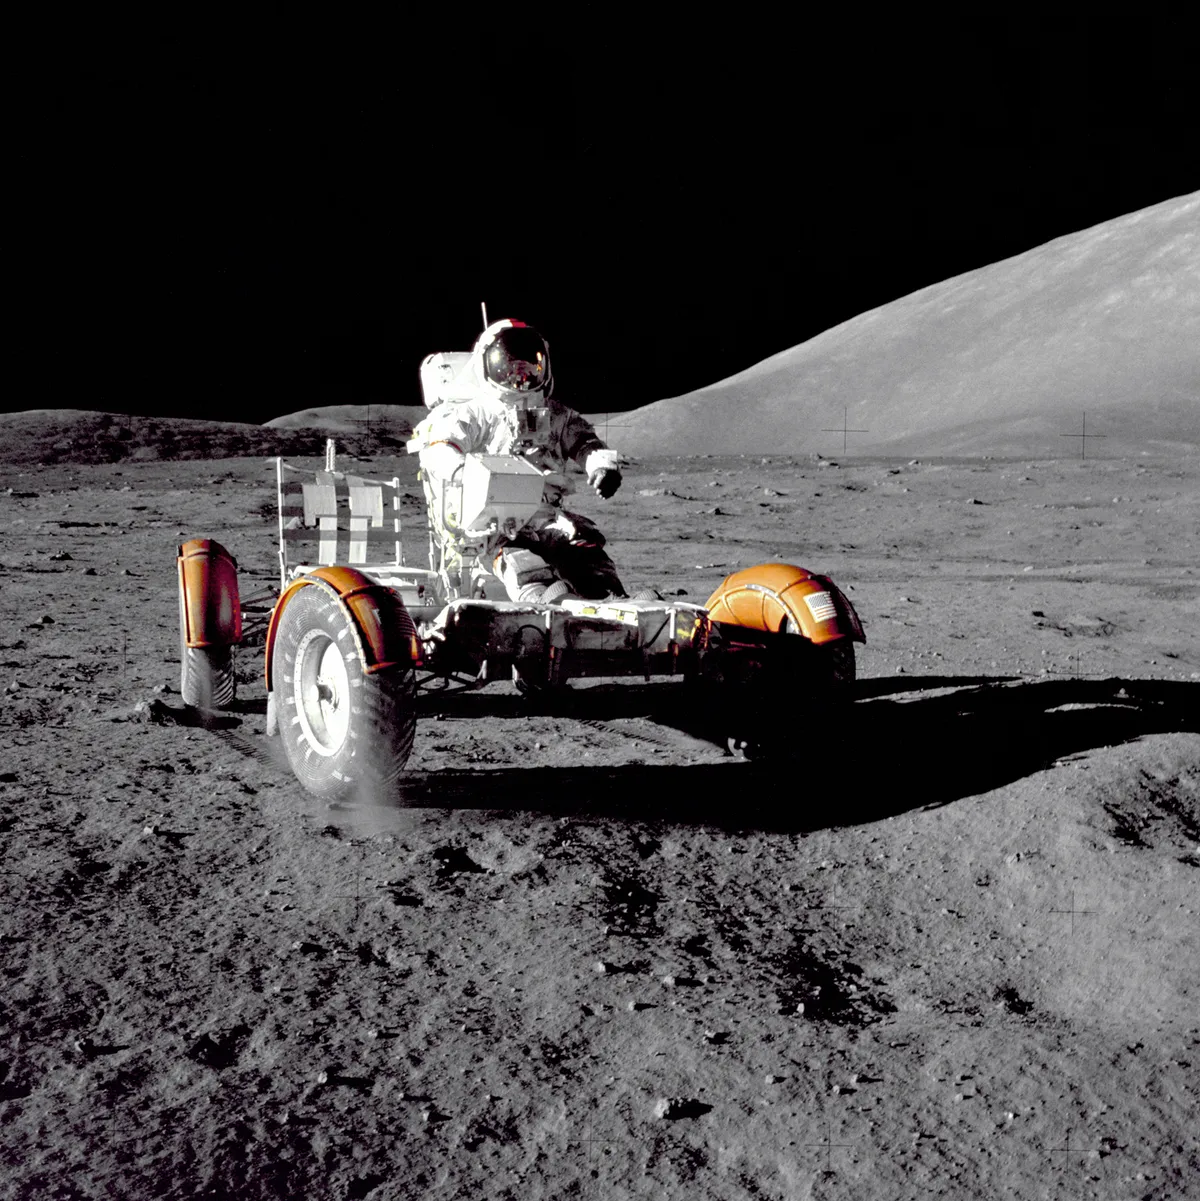 Gene Cernan takes the Lunar Roving Vehicle for a ride on the Moon during the Apollo 17 mission. (NASA)